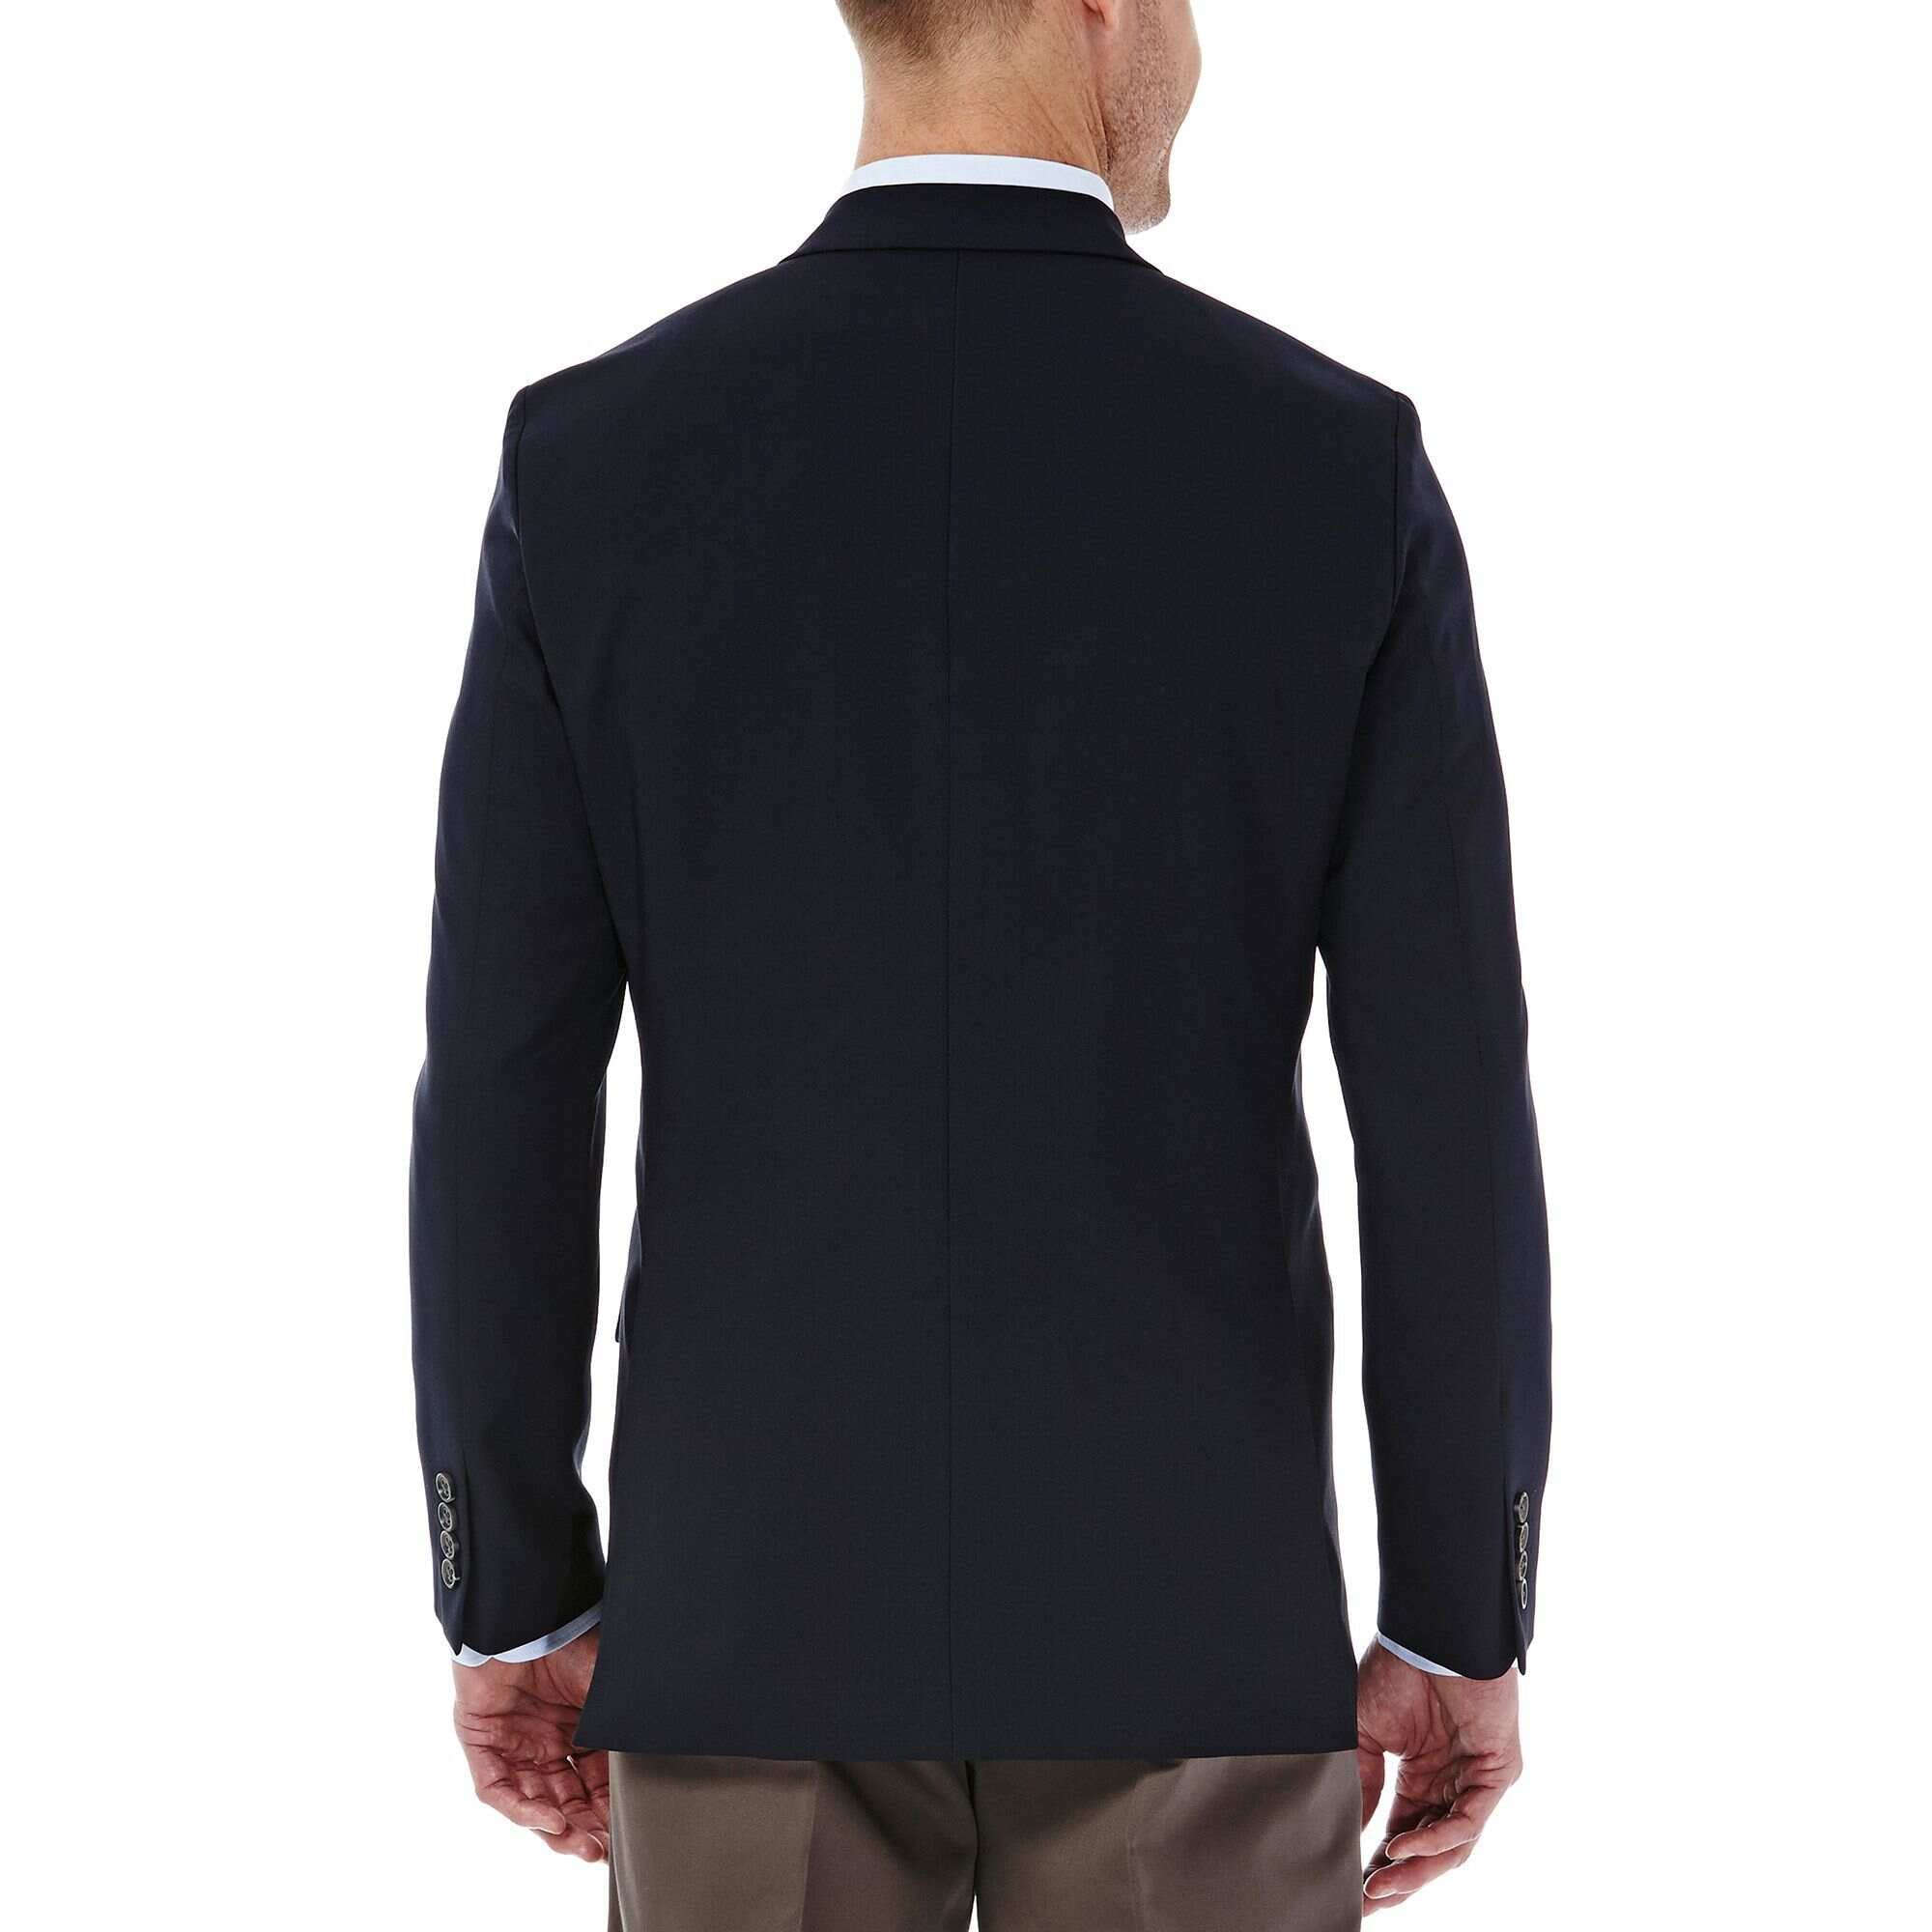 Haggar Clothing Men's Tailored Fit In Motion Blazer